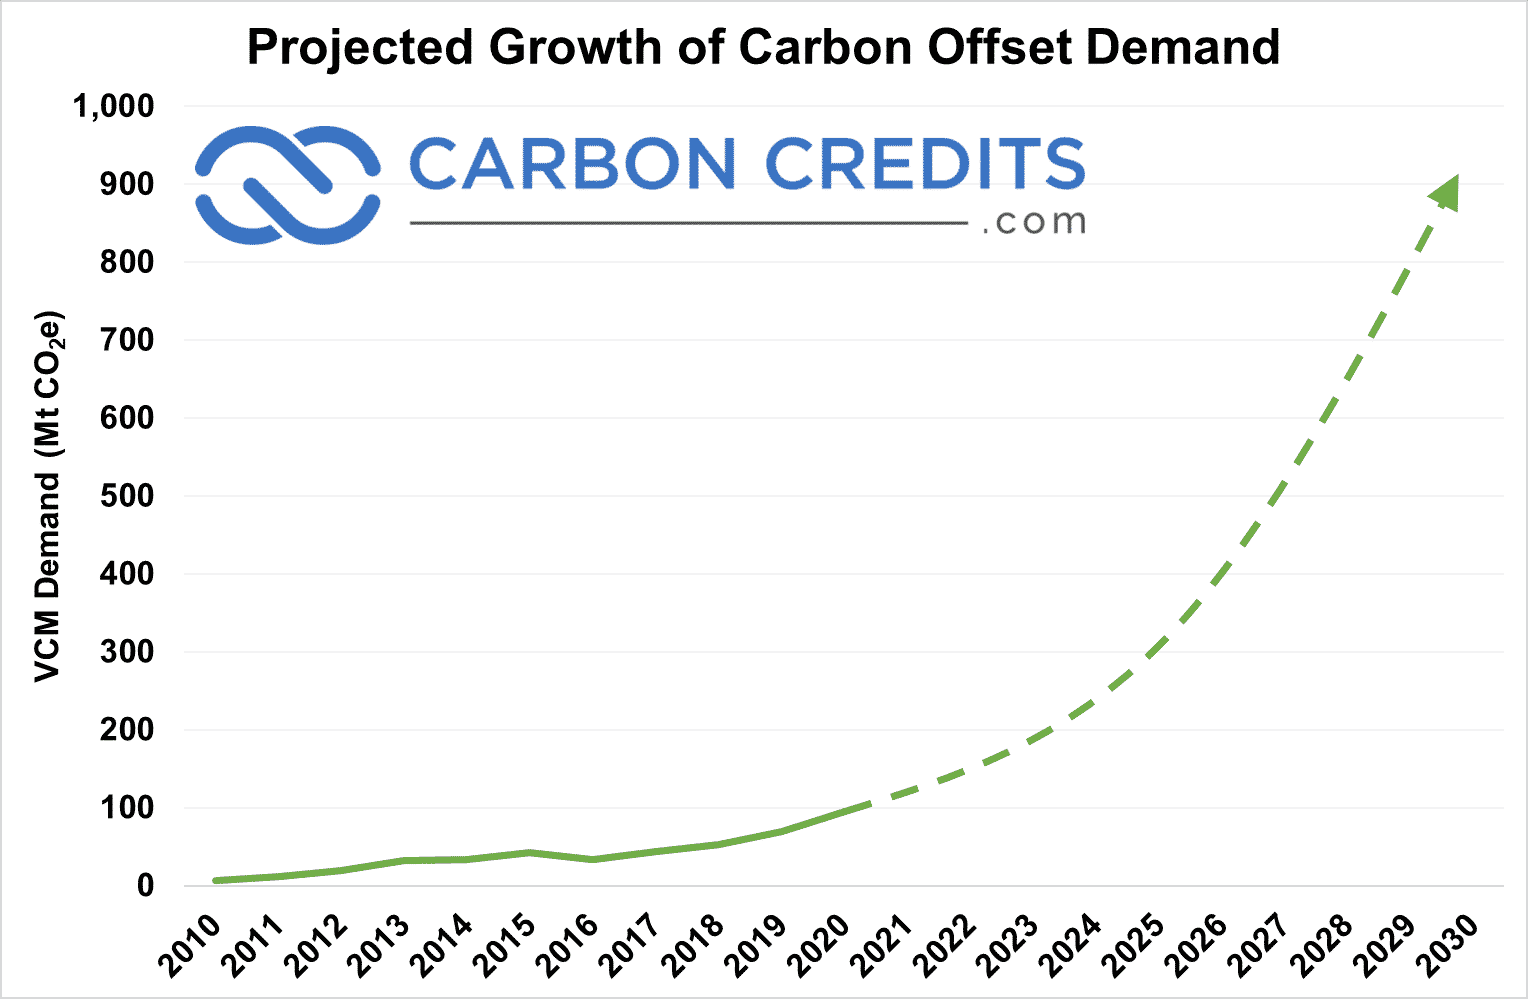 Projected growth in demand for carbon offsets